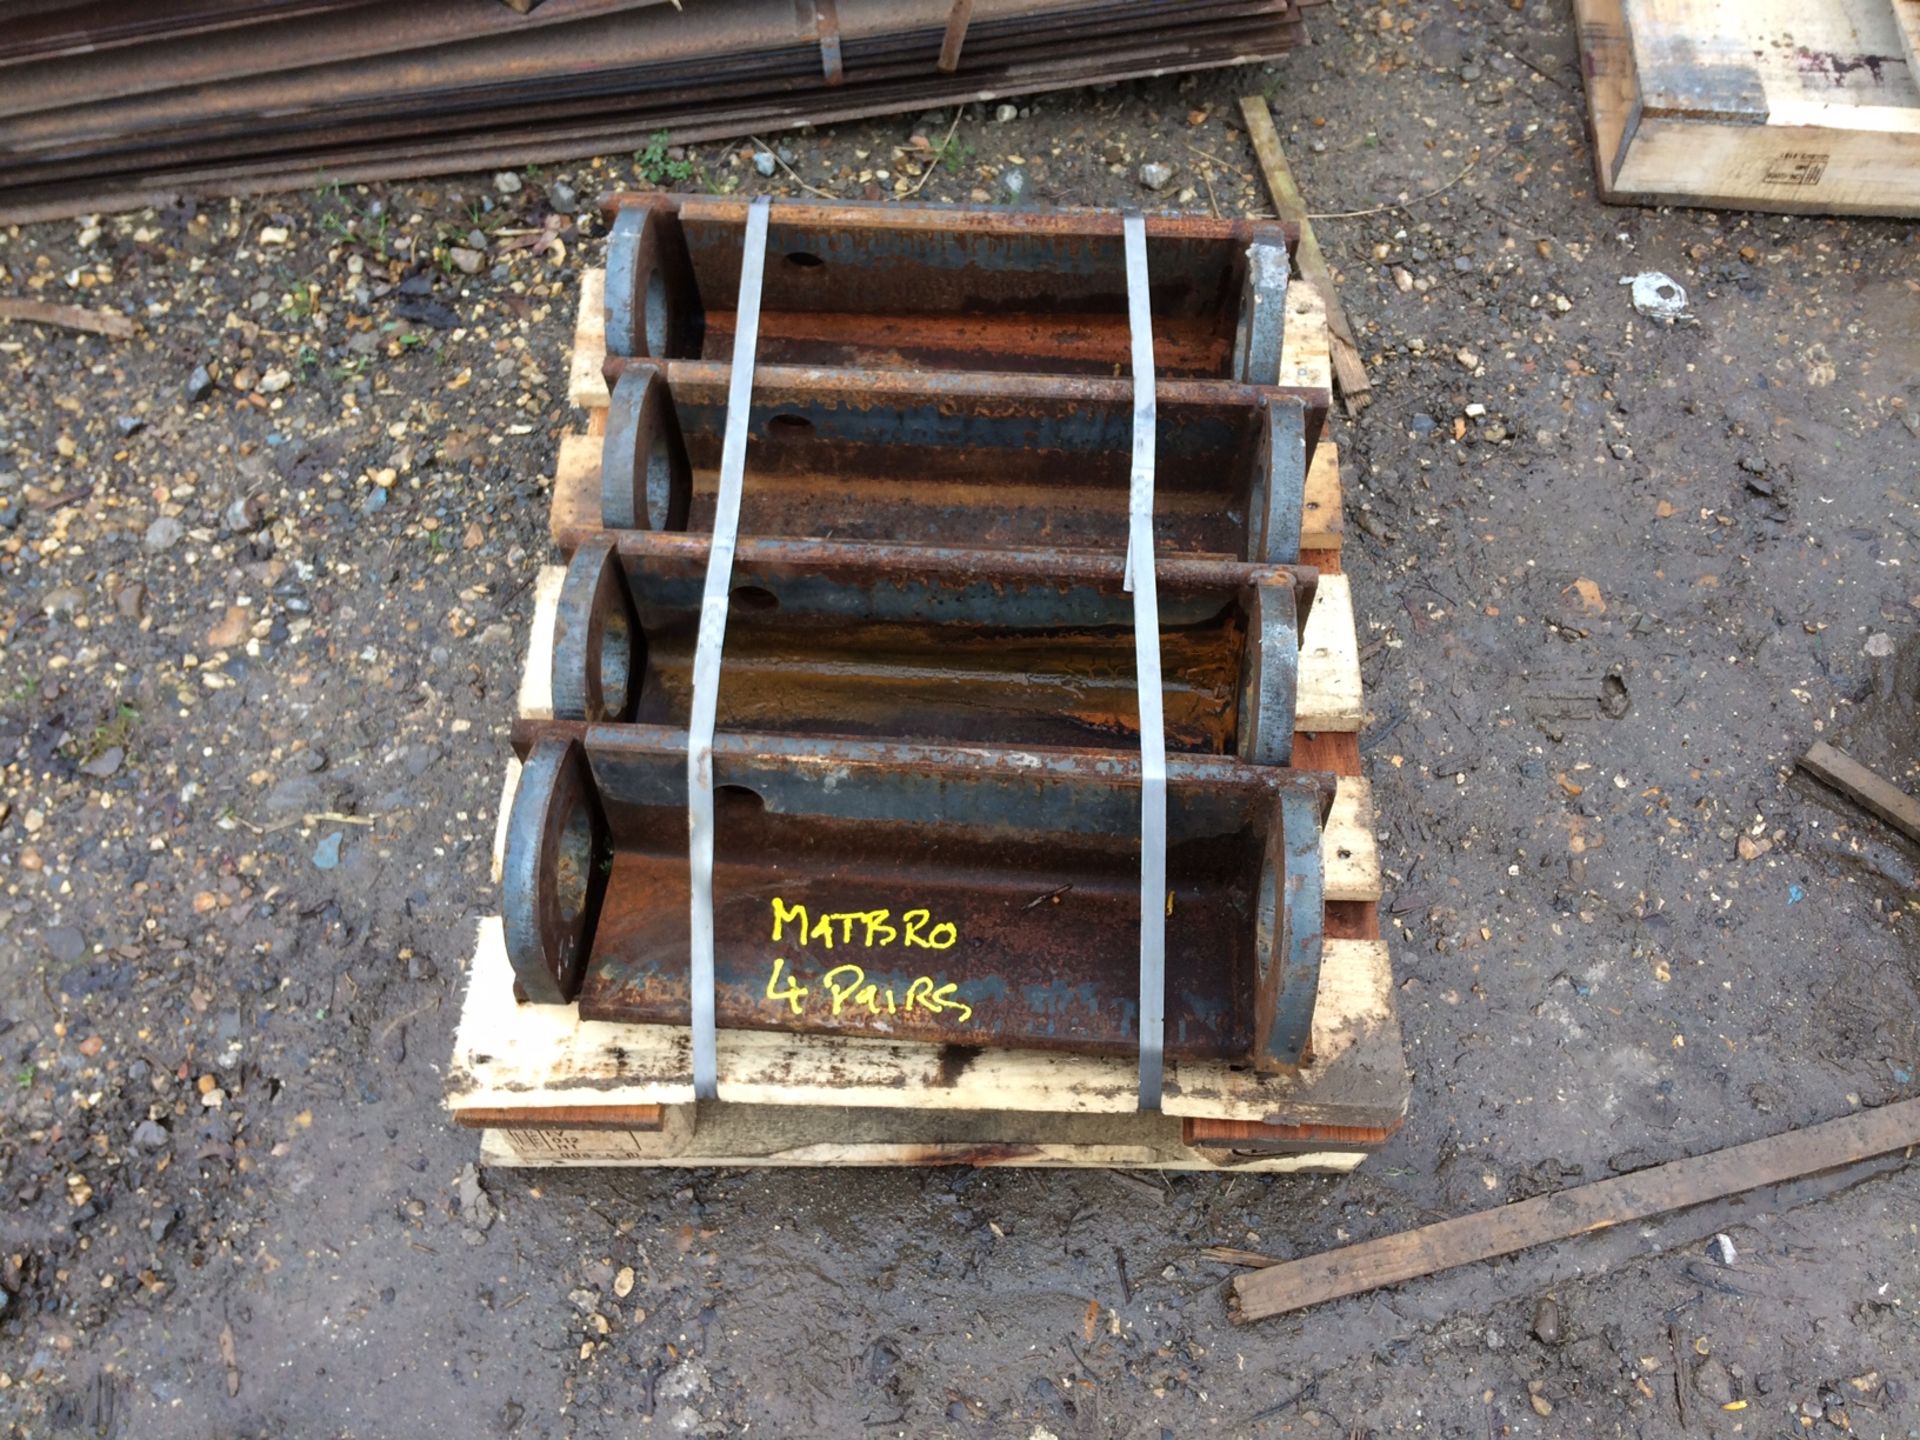 4 x Pairs of Pin and Cone (Matbro) Weld on Loader Brackets